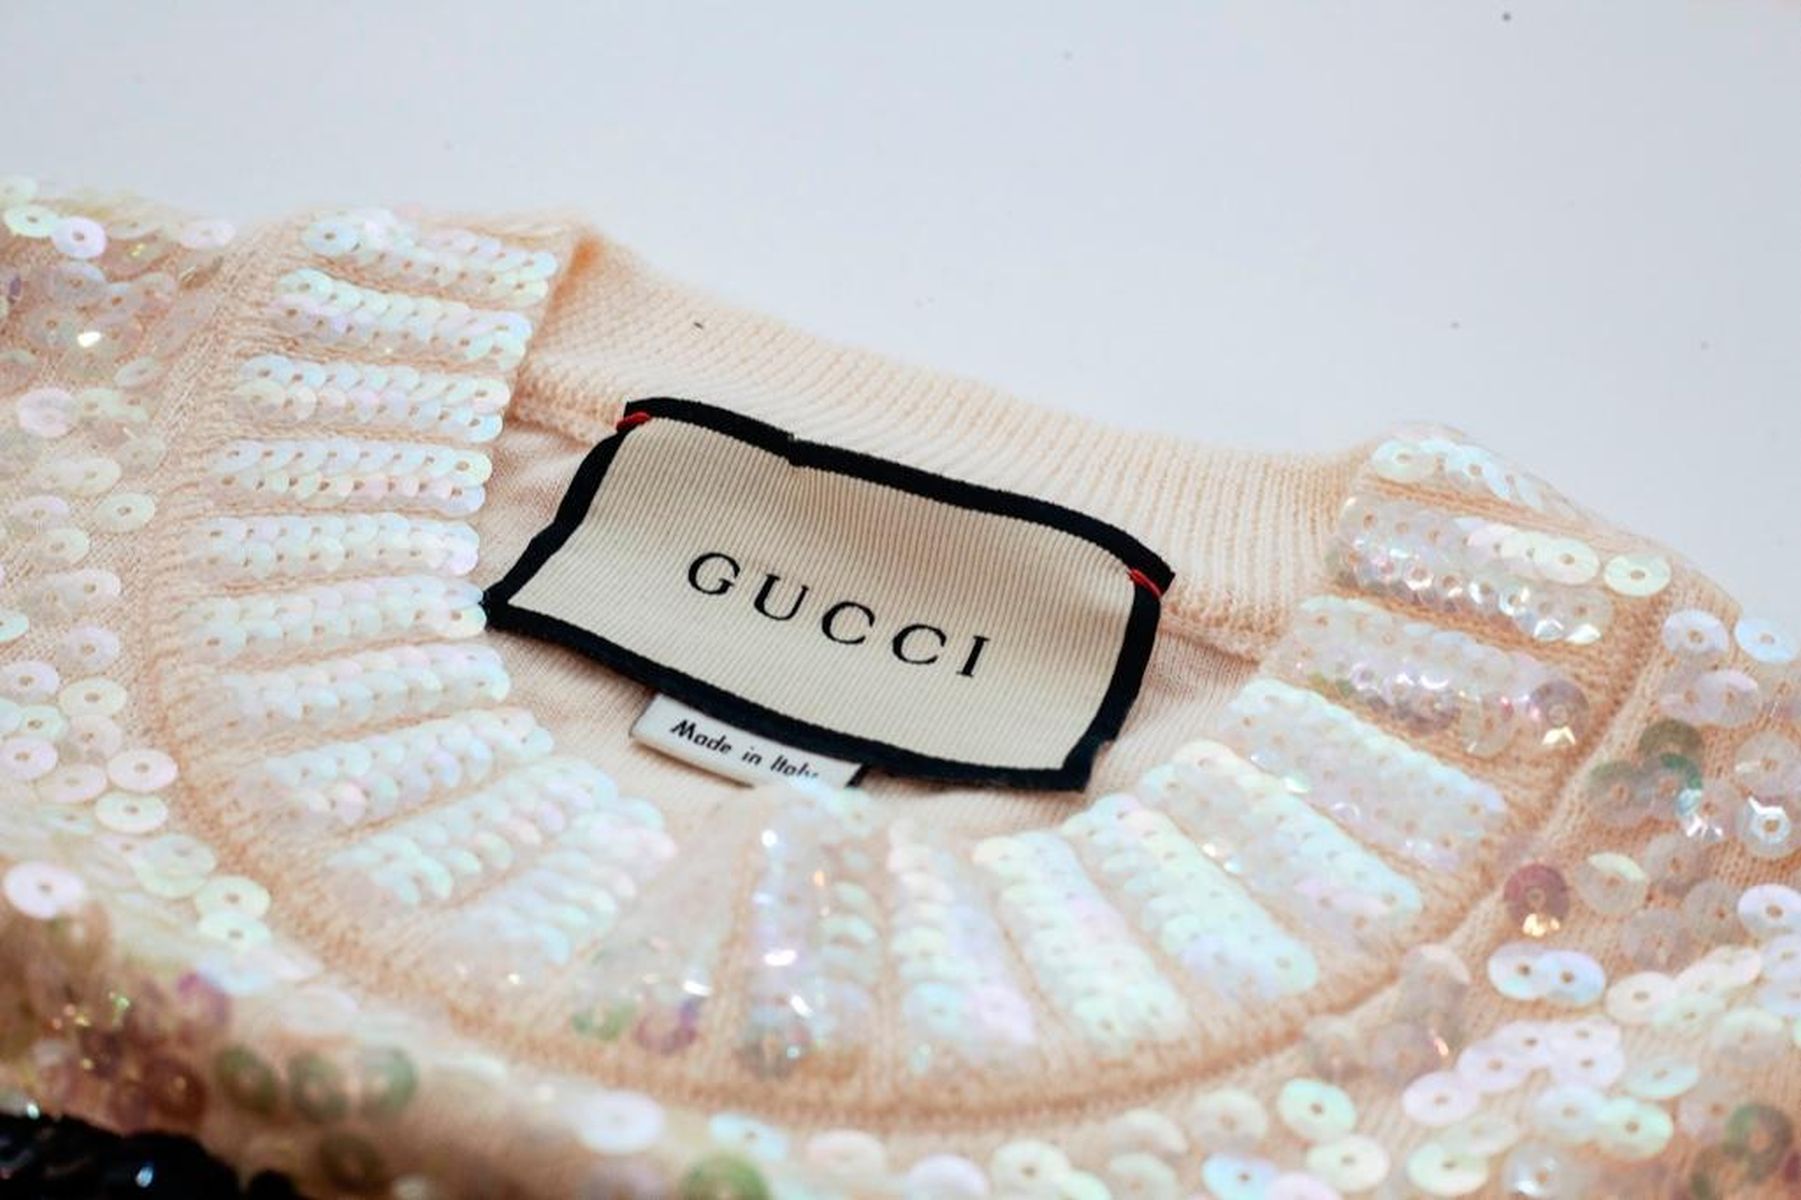 Gucci X Disney Sequin Embellished Snow White Sweater - Image 8 of 9